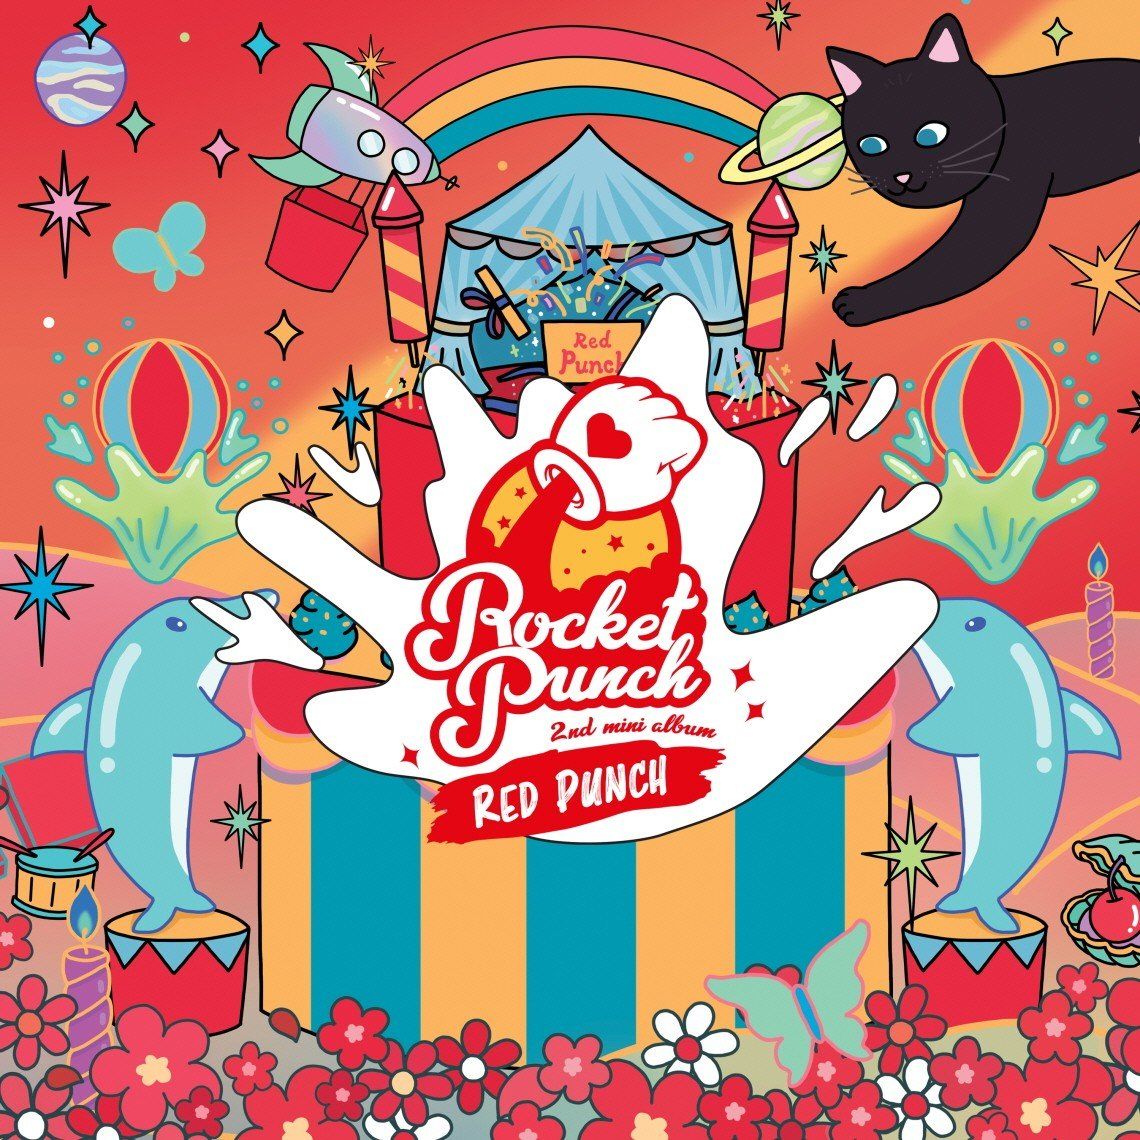 Rocket Punch - Red Punch